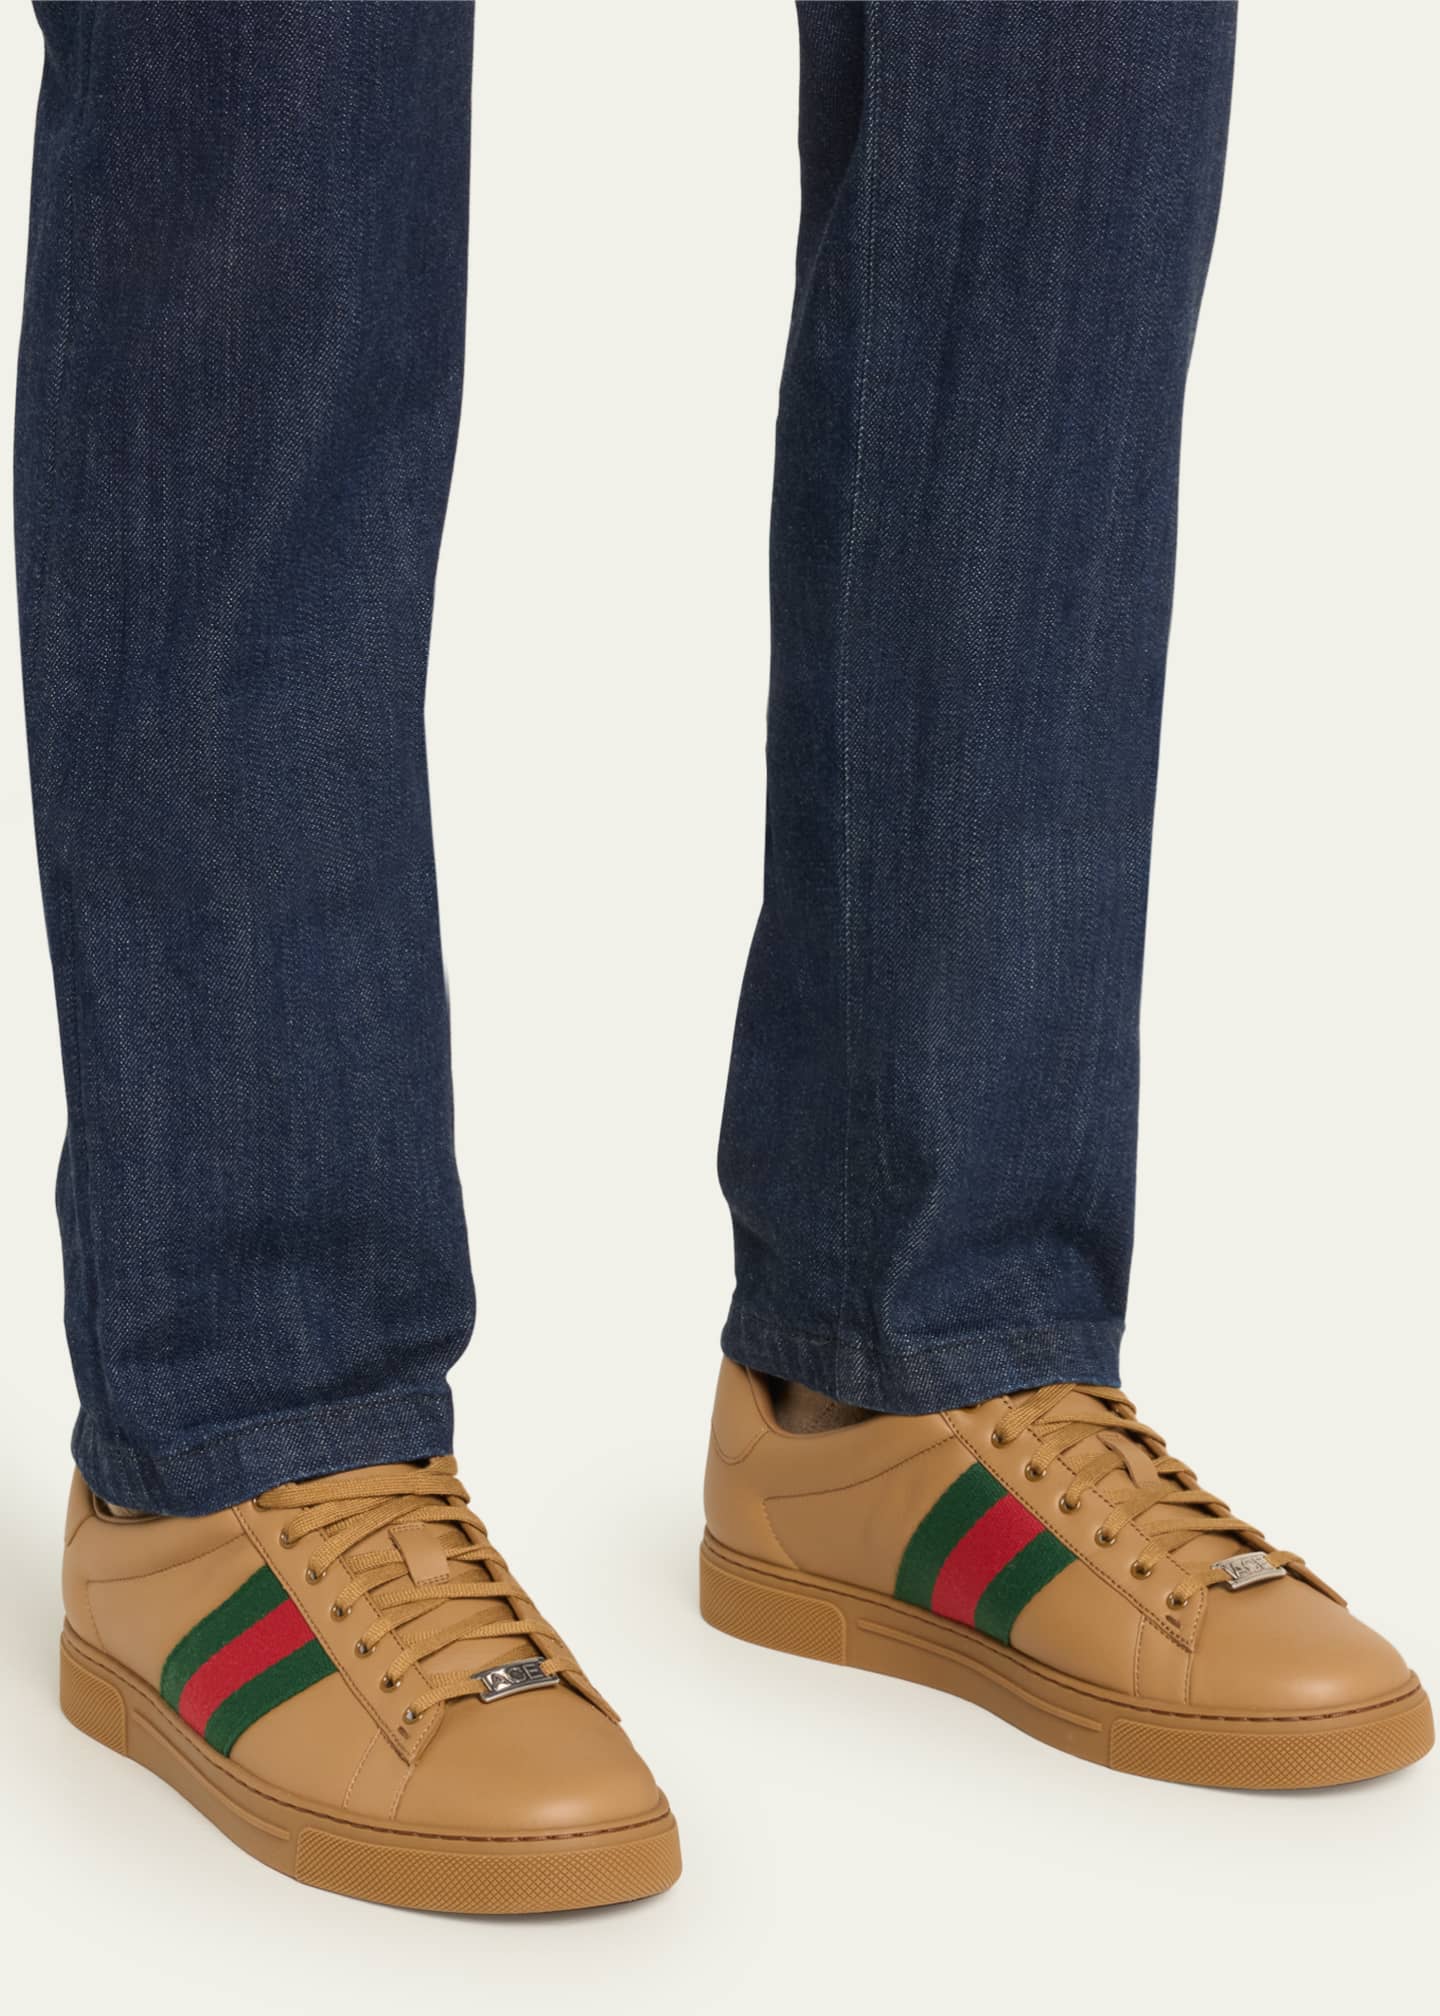 Gucci Men's Ace Leather Low-Top Sneakers with Web - Bergdorf Goodman